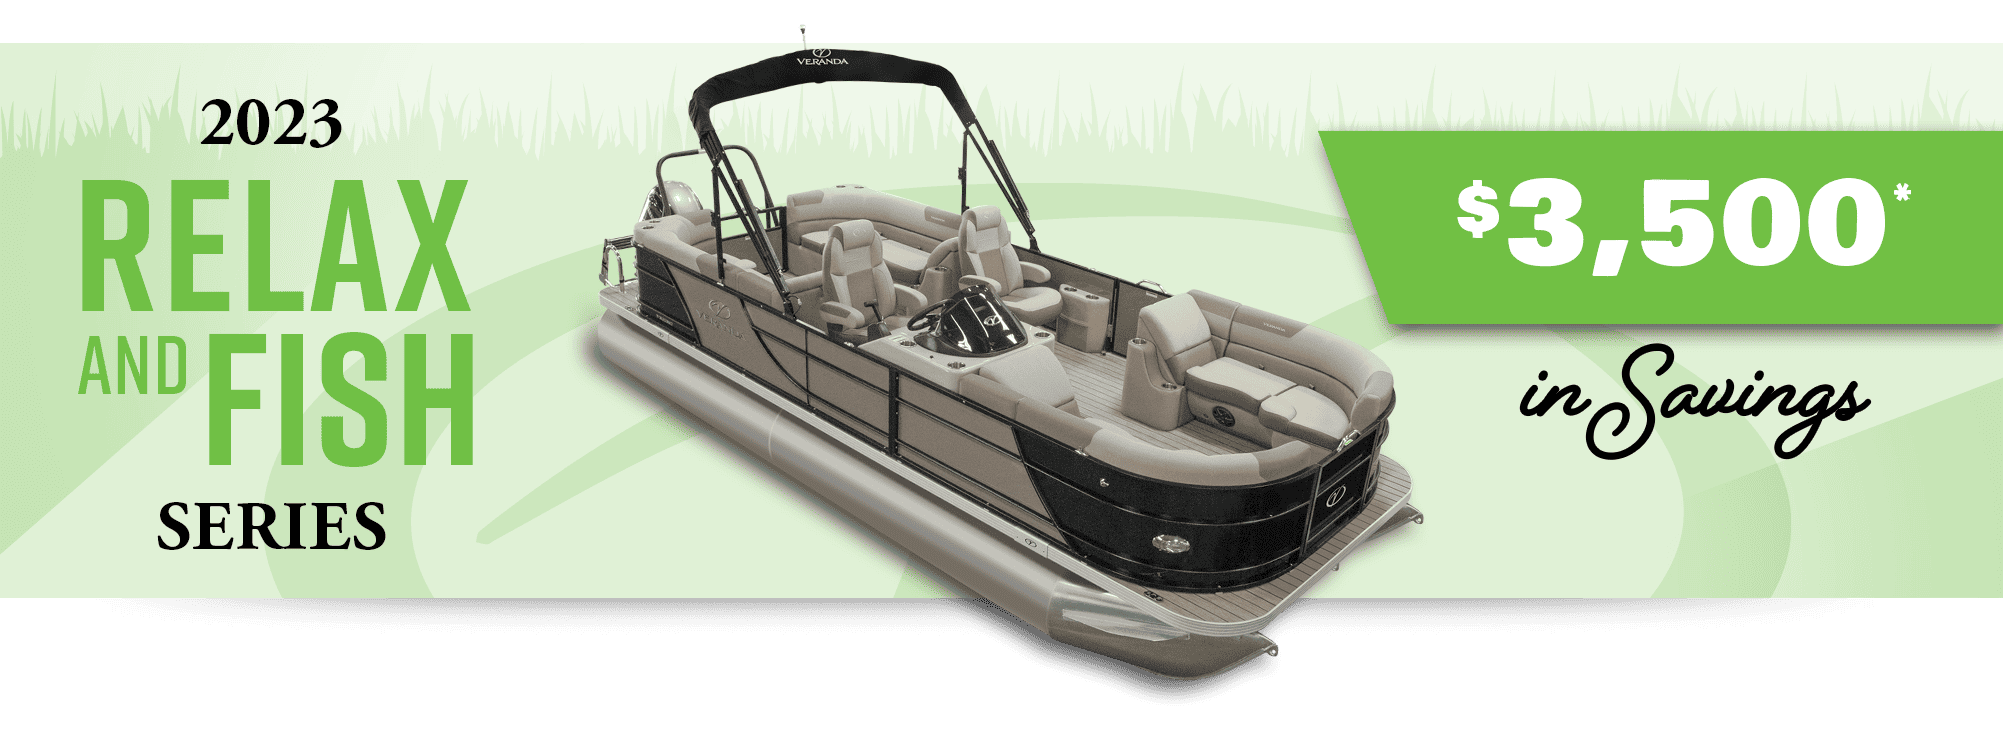 $3,500 off 2023 Relax and Fish Series